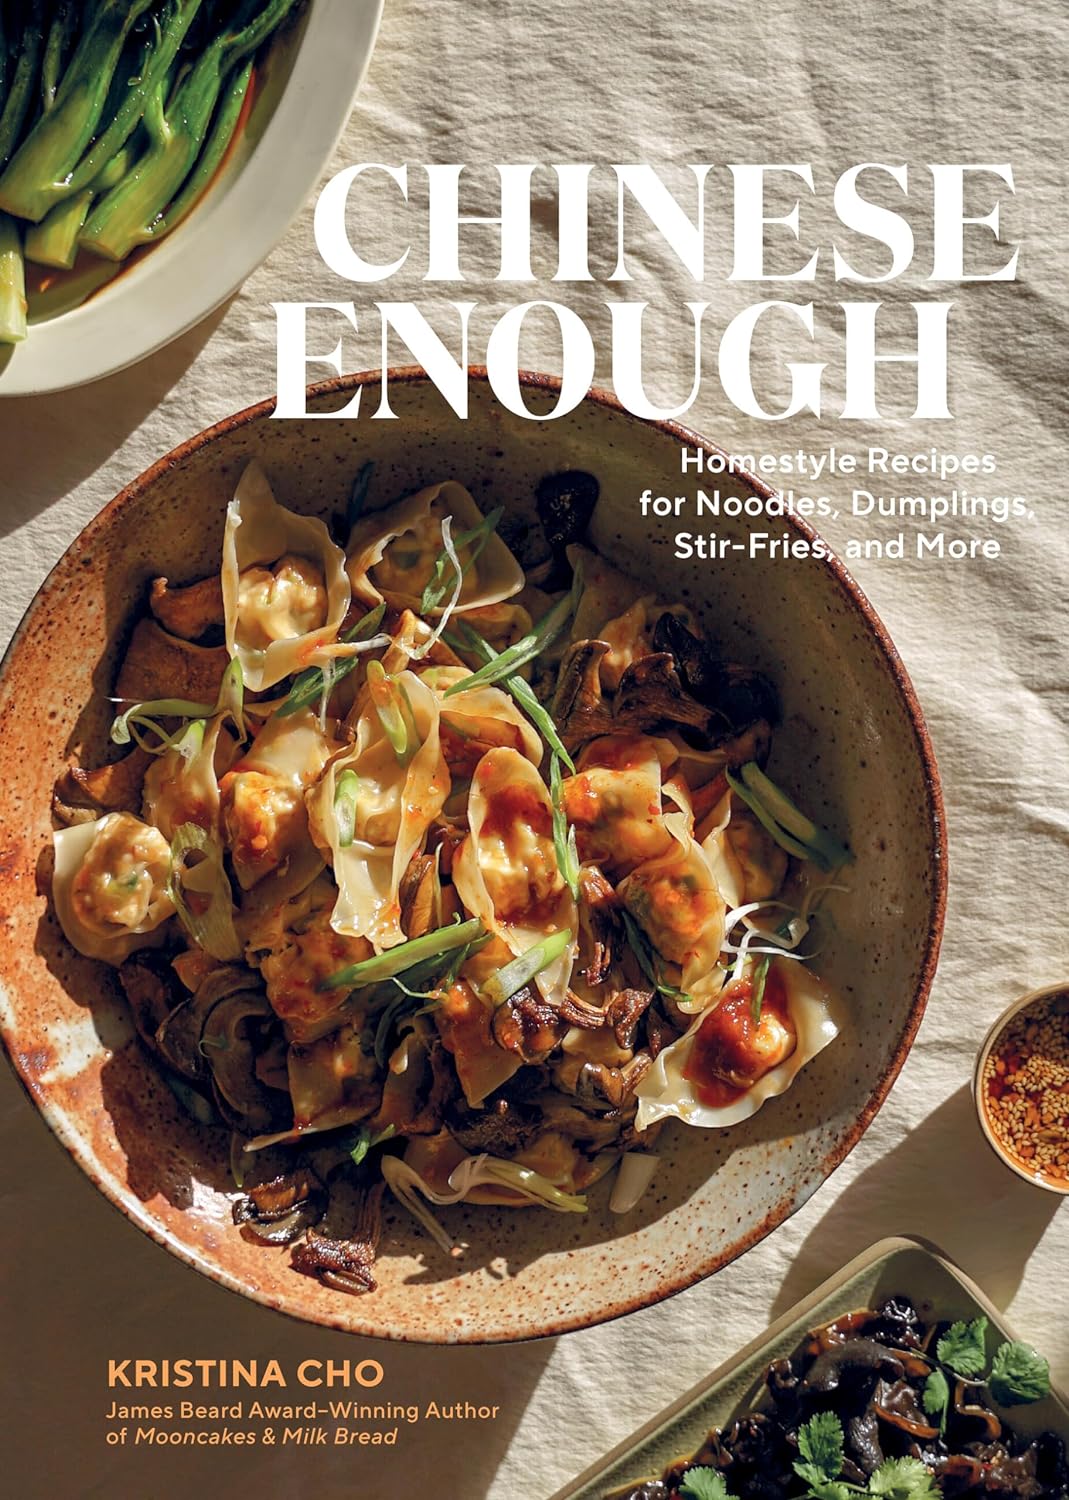 *Pre-order* Chinese Enough: Homestyle Recipes for Noodles, Dumplings, Stir-Fries, and More (Kristina Cho)